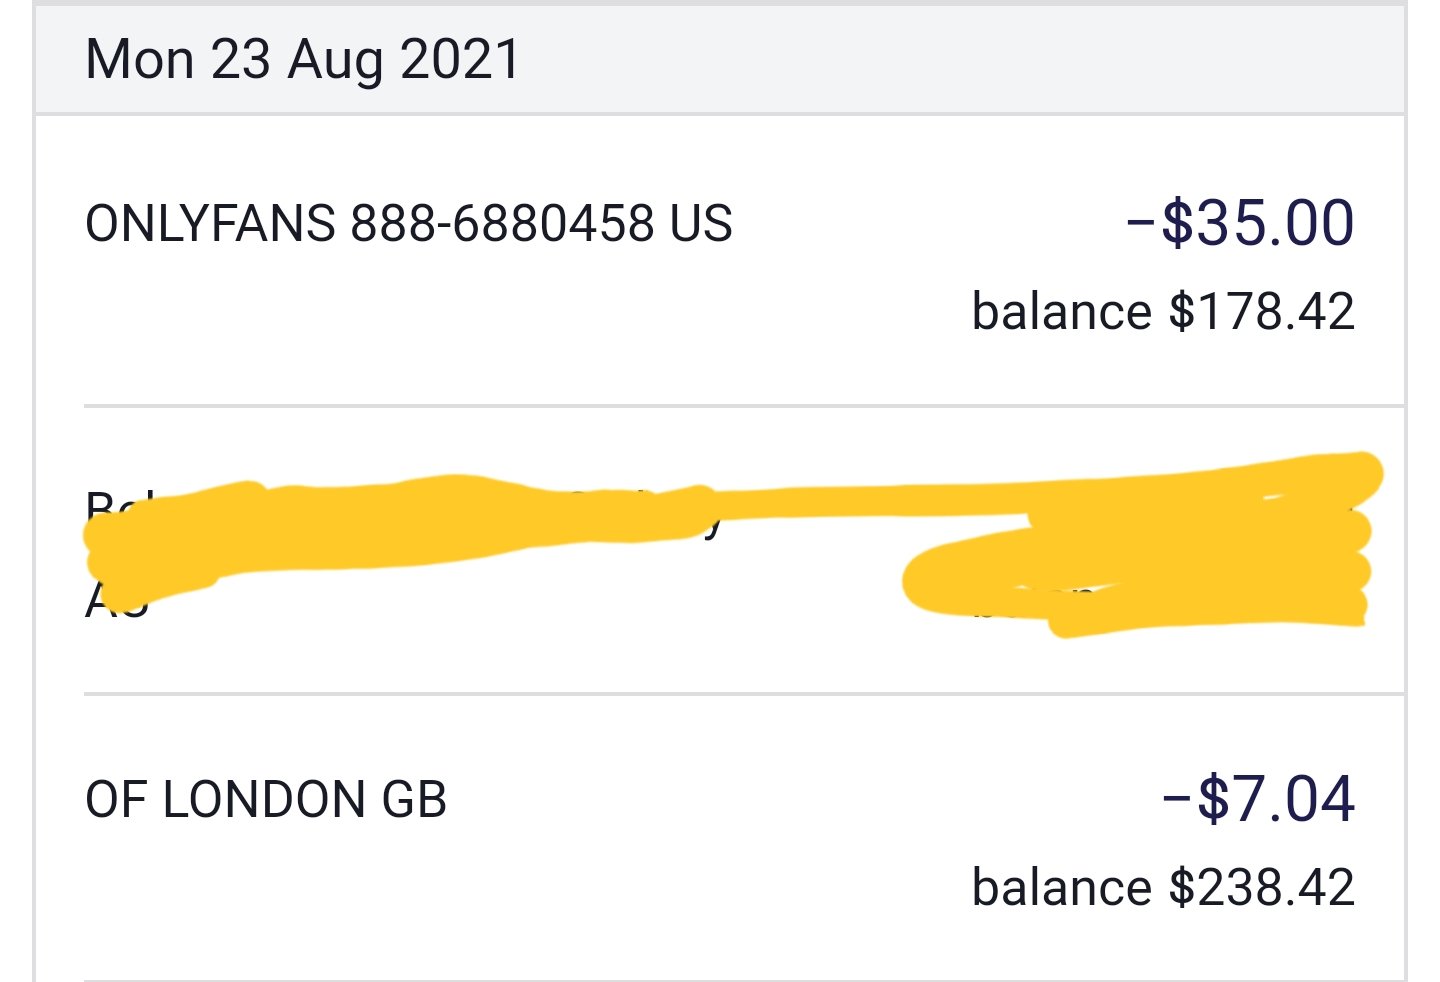 what are of london gb charges on bank statement